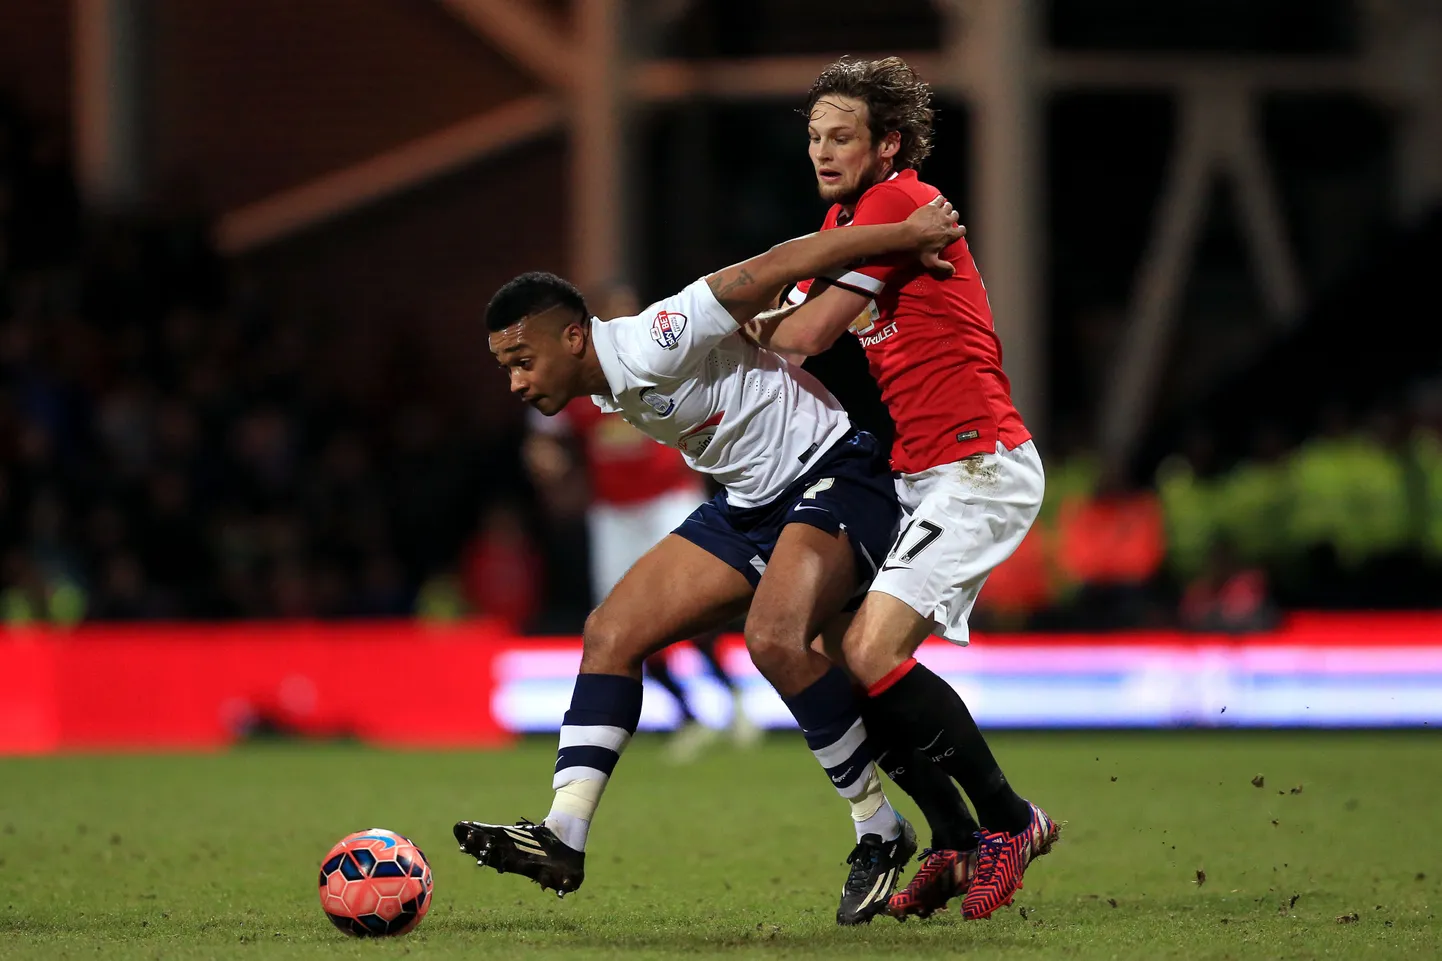 Manchester United's Daley Blind (right) and Preston North End's Chris Humphrey (left) battle for the ball.